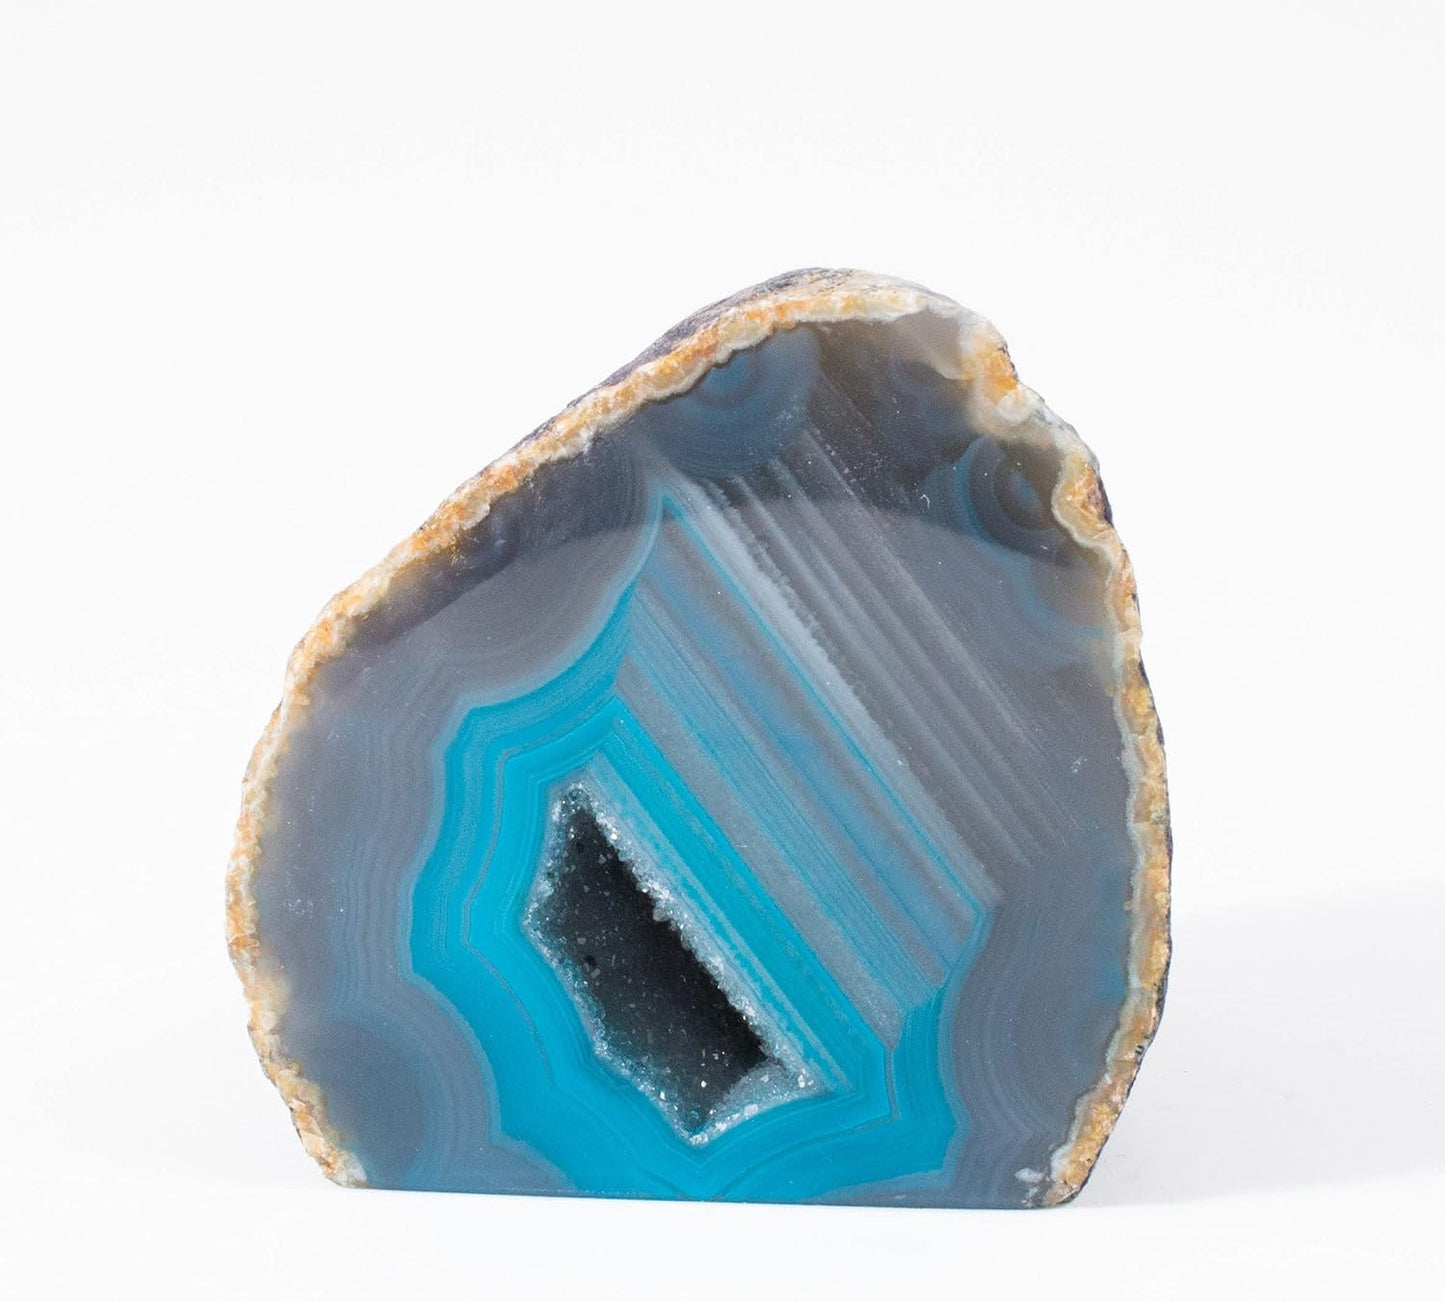 Polished Teal Agate Geode - Small